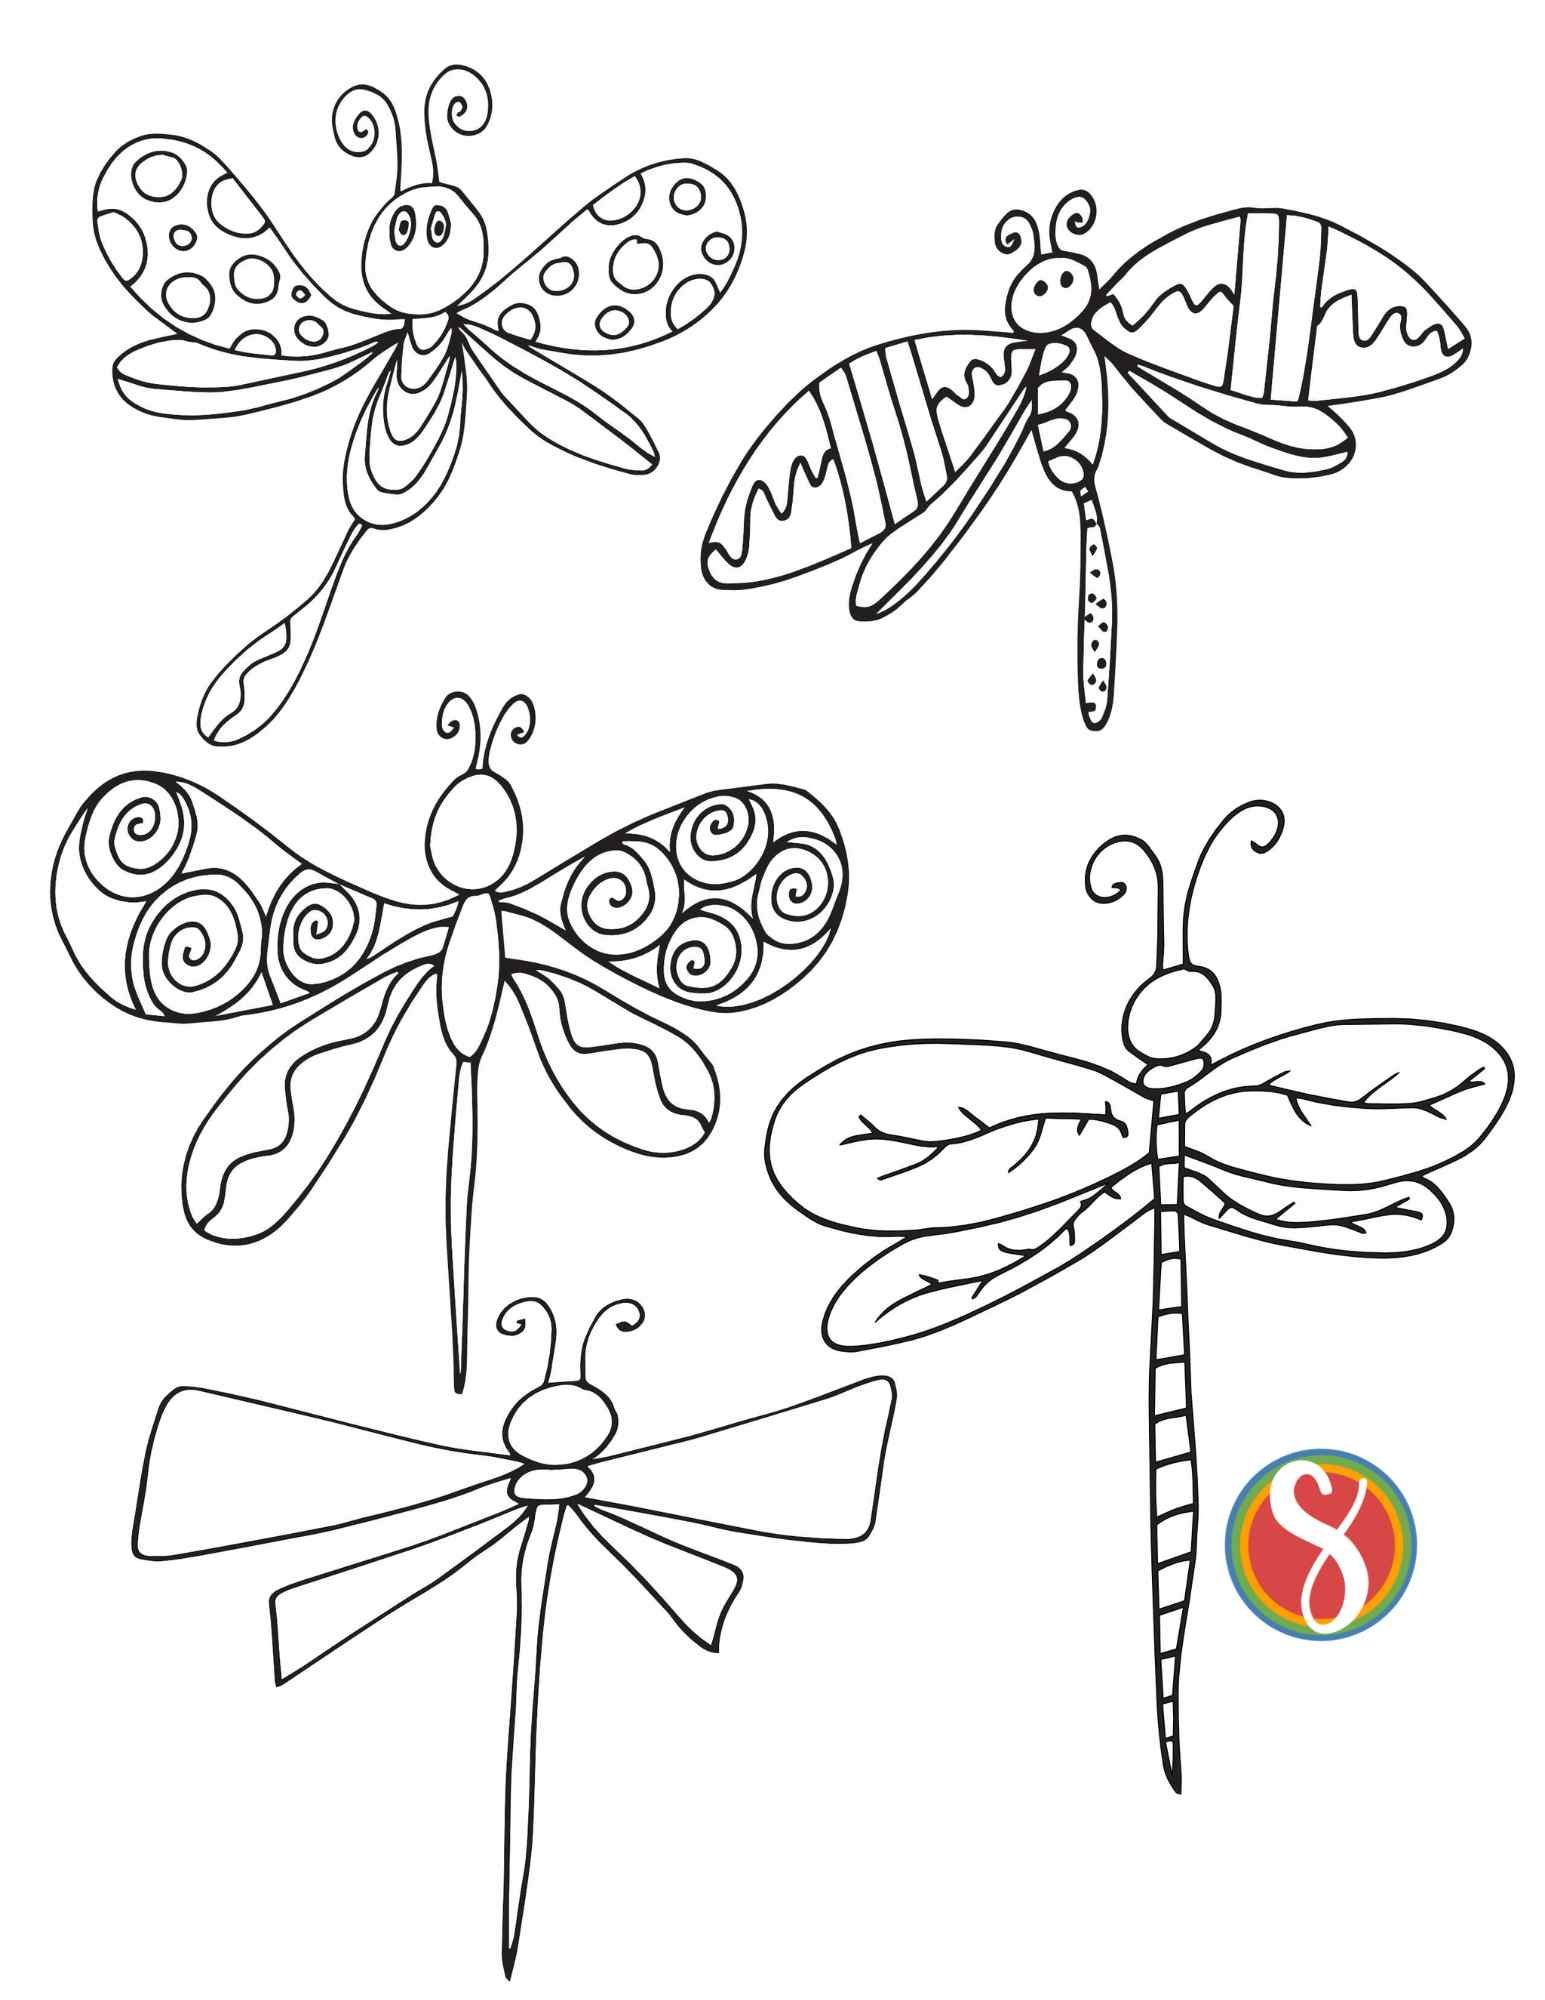 5 small dragonflies on a dragonfly coloring page